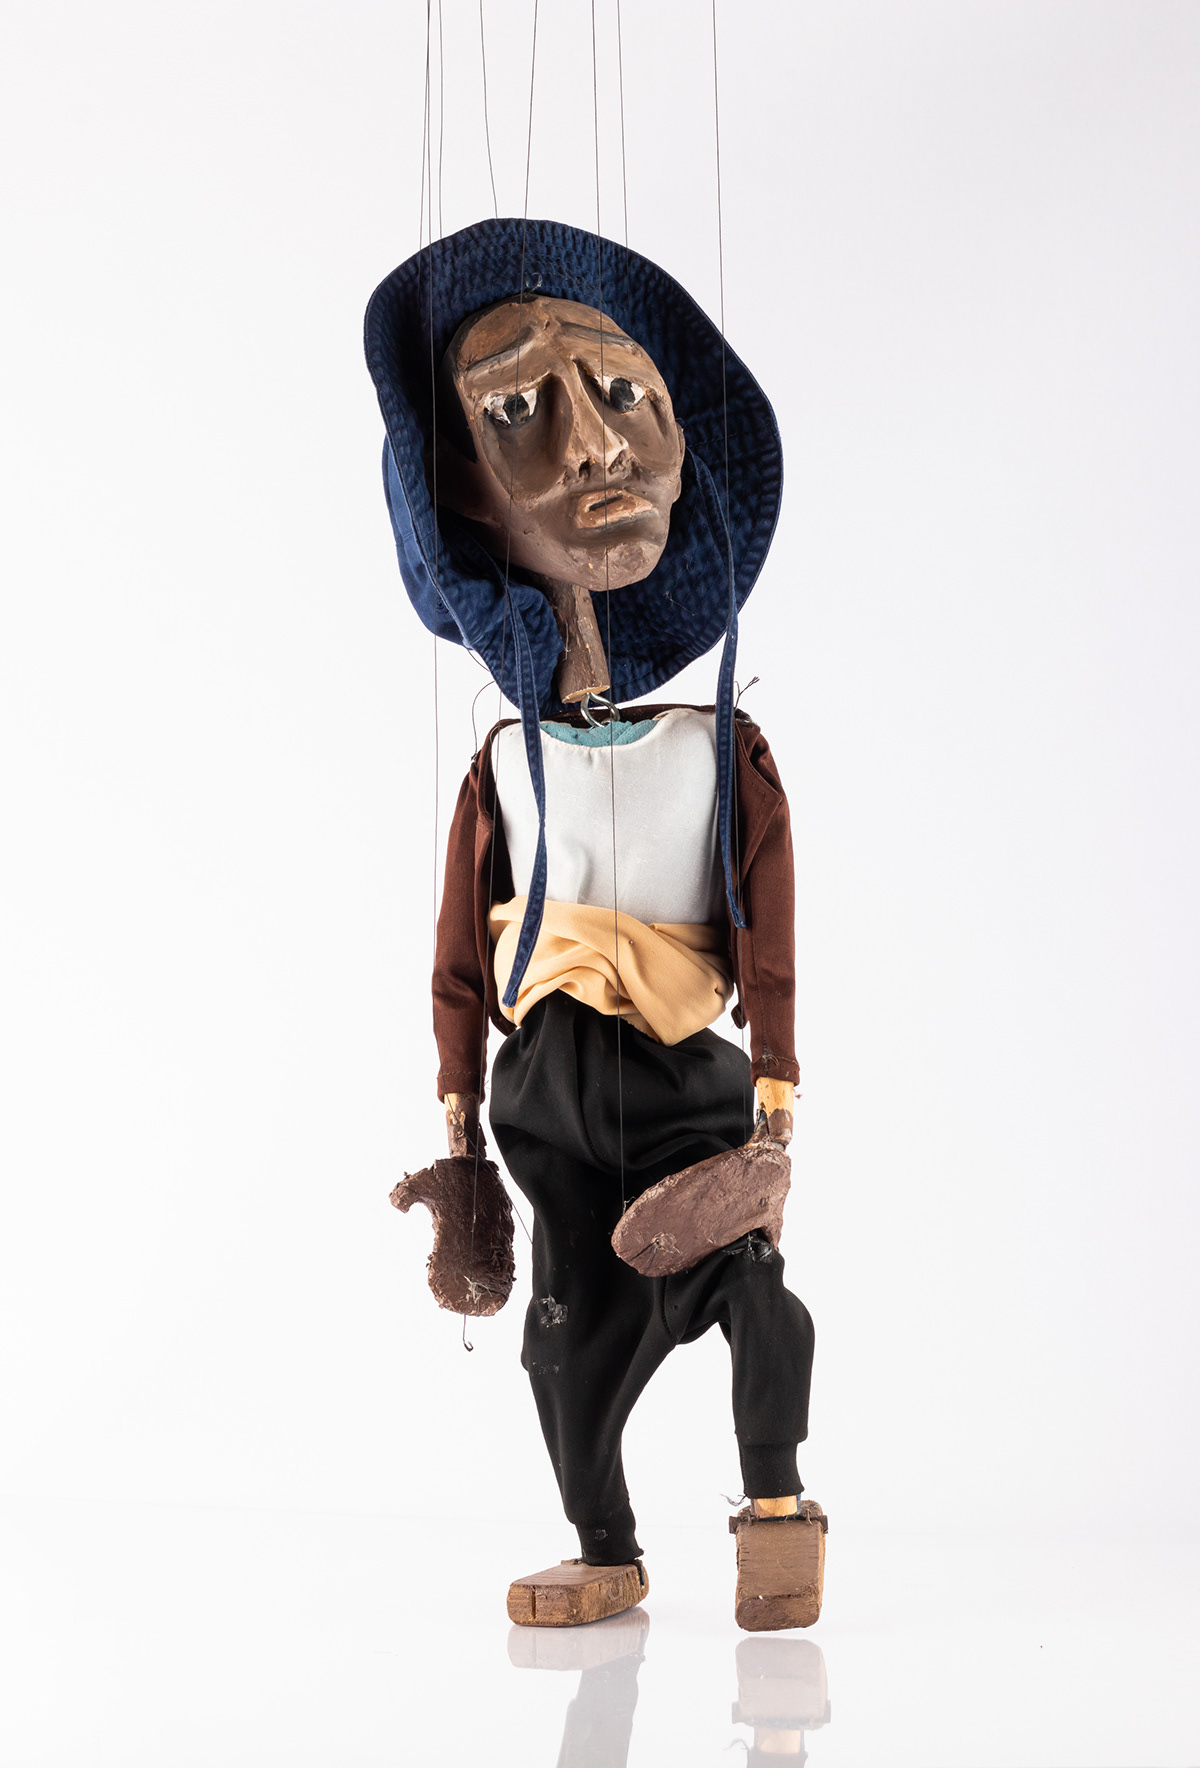 Egyptian features egyptian marionette marionette paper marché wooden puppets عرائس مسرح عرائس